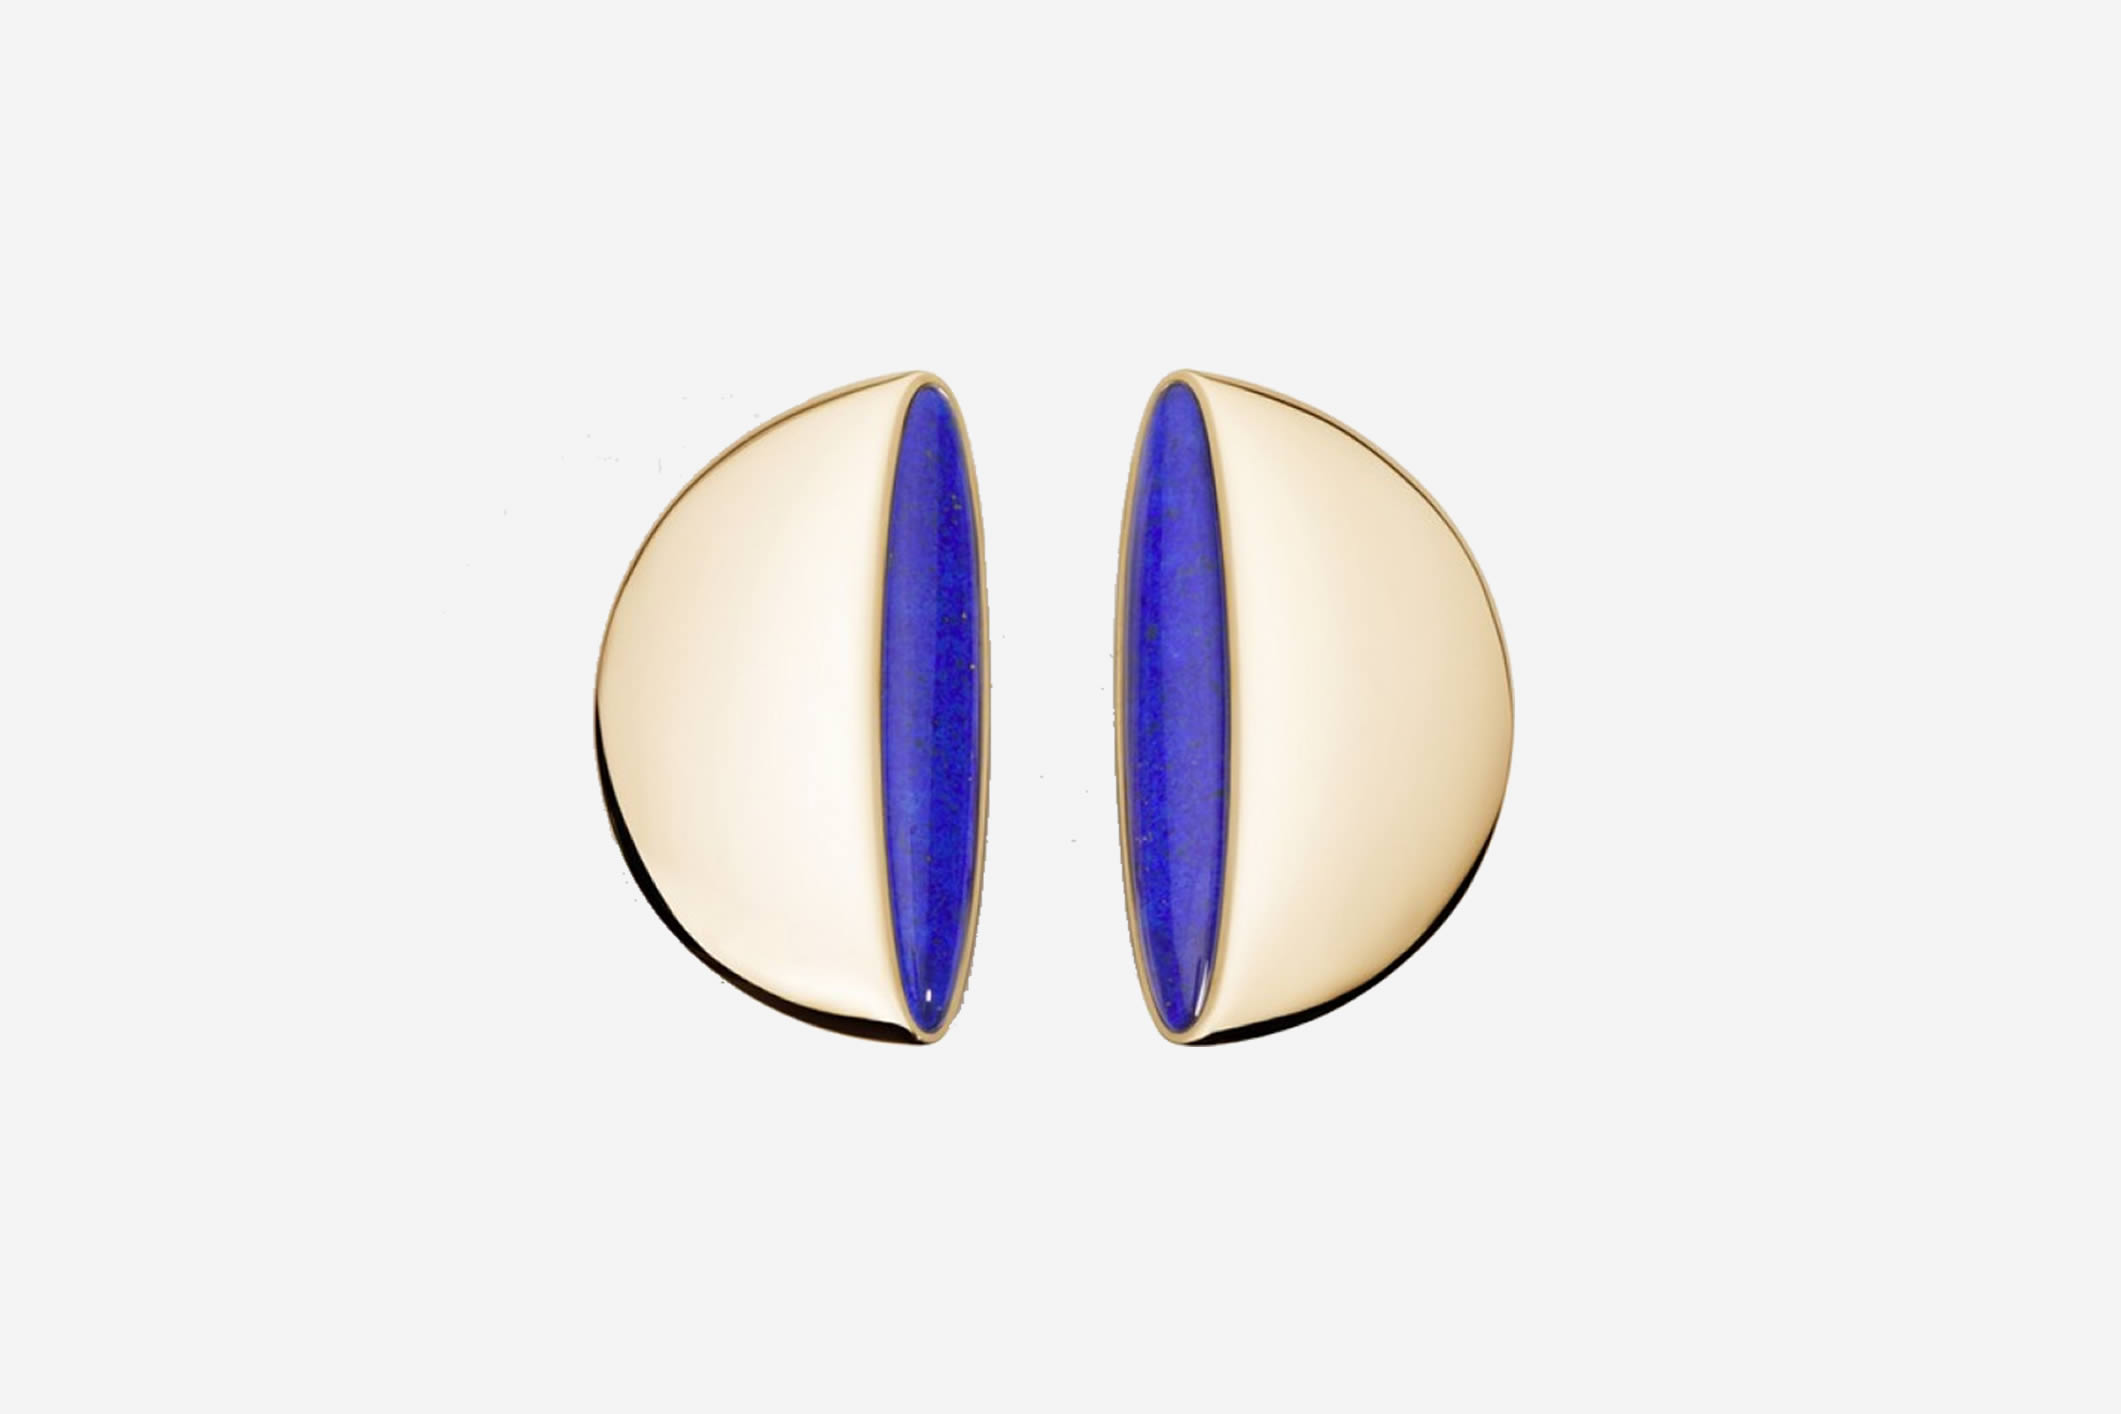 Rose gold Eclisse earrings with lapis lazuli by Vhernier